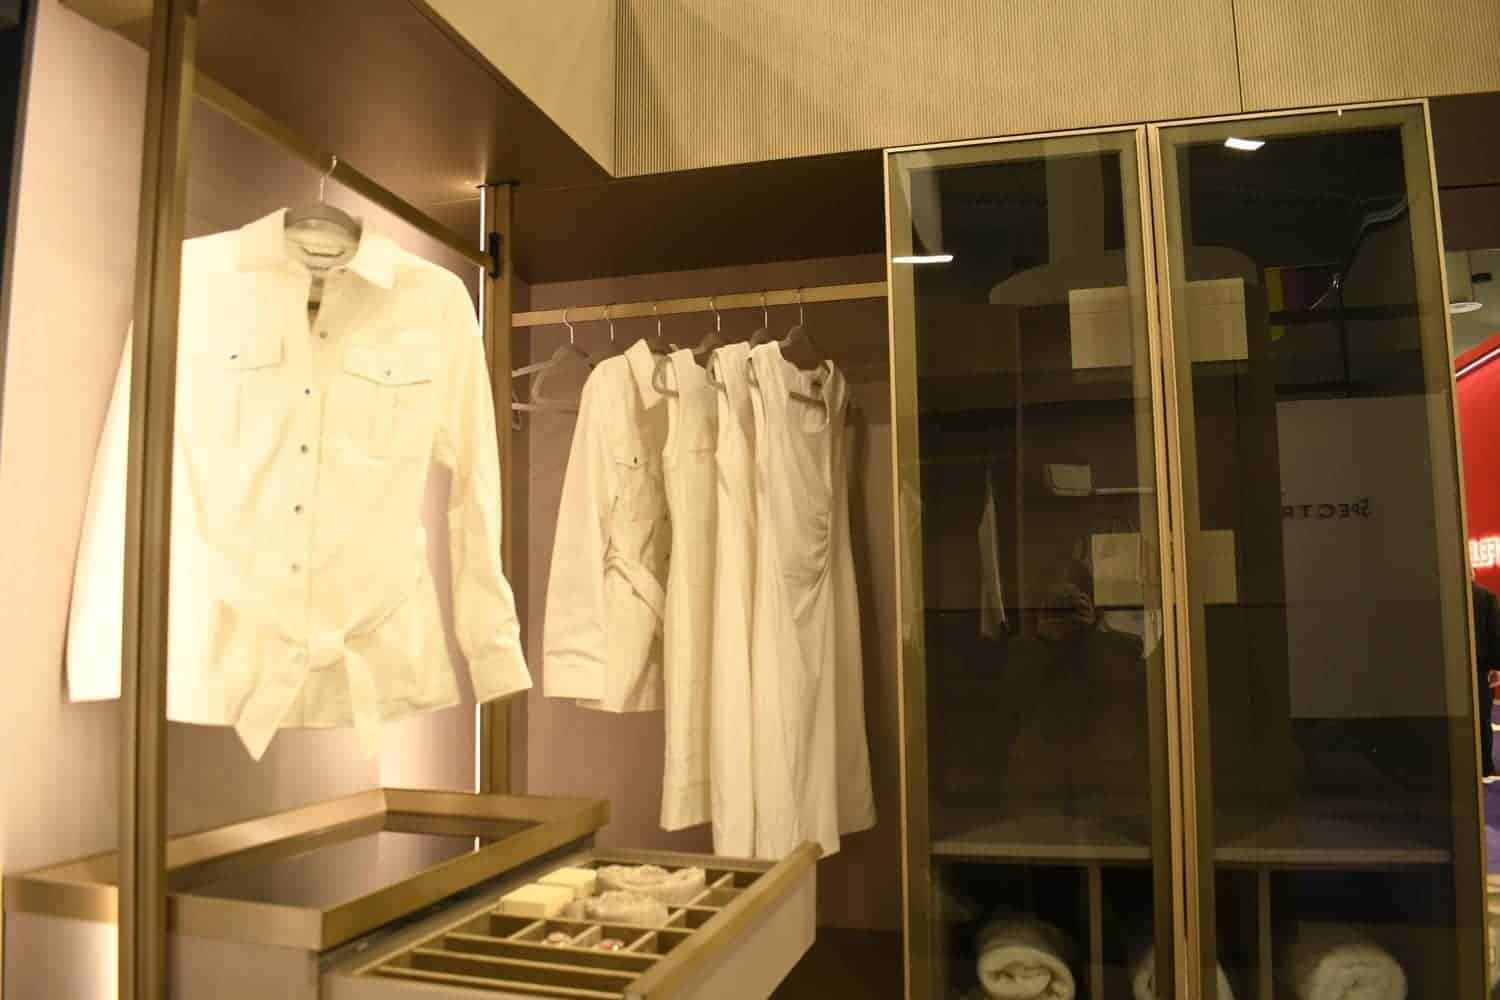 Glass door closet with hangers and white shirts on it